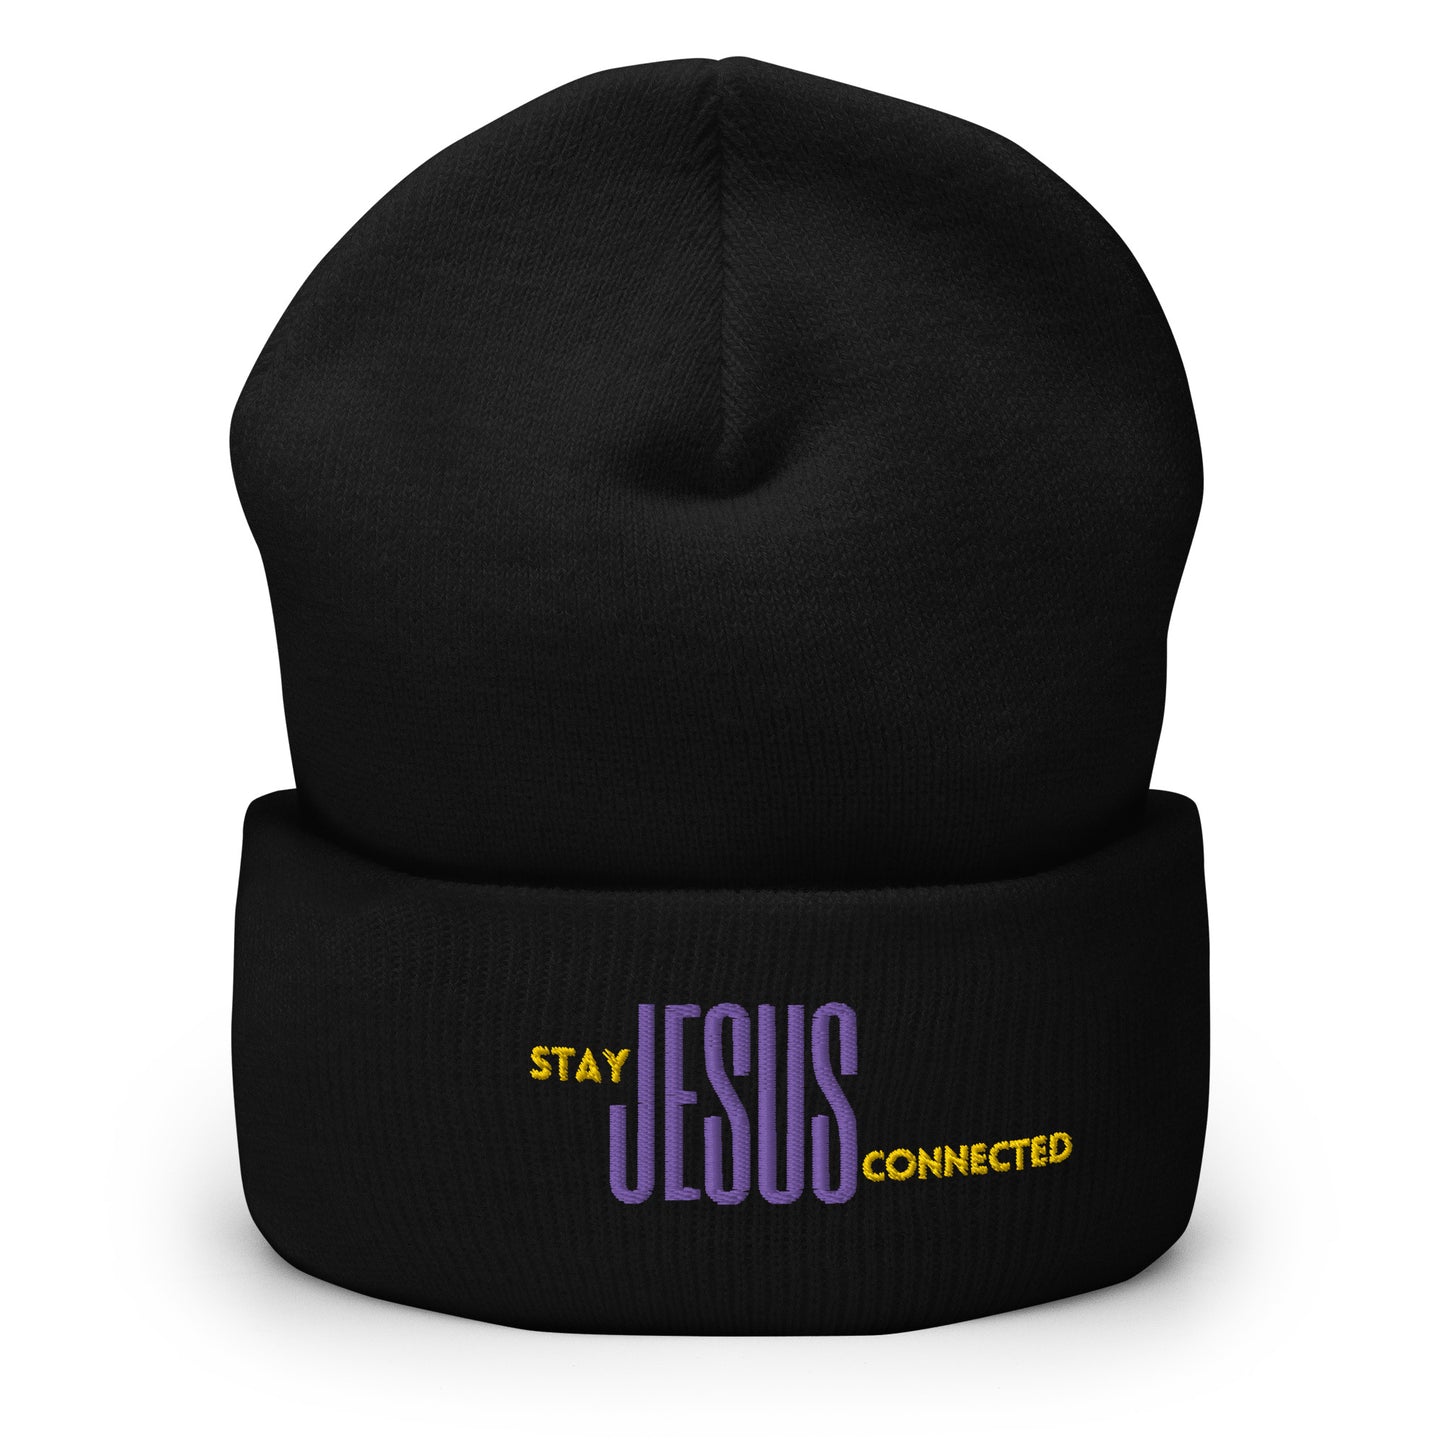 "Stay Connected" Cuffed Beanie